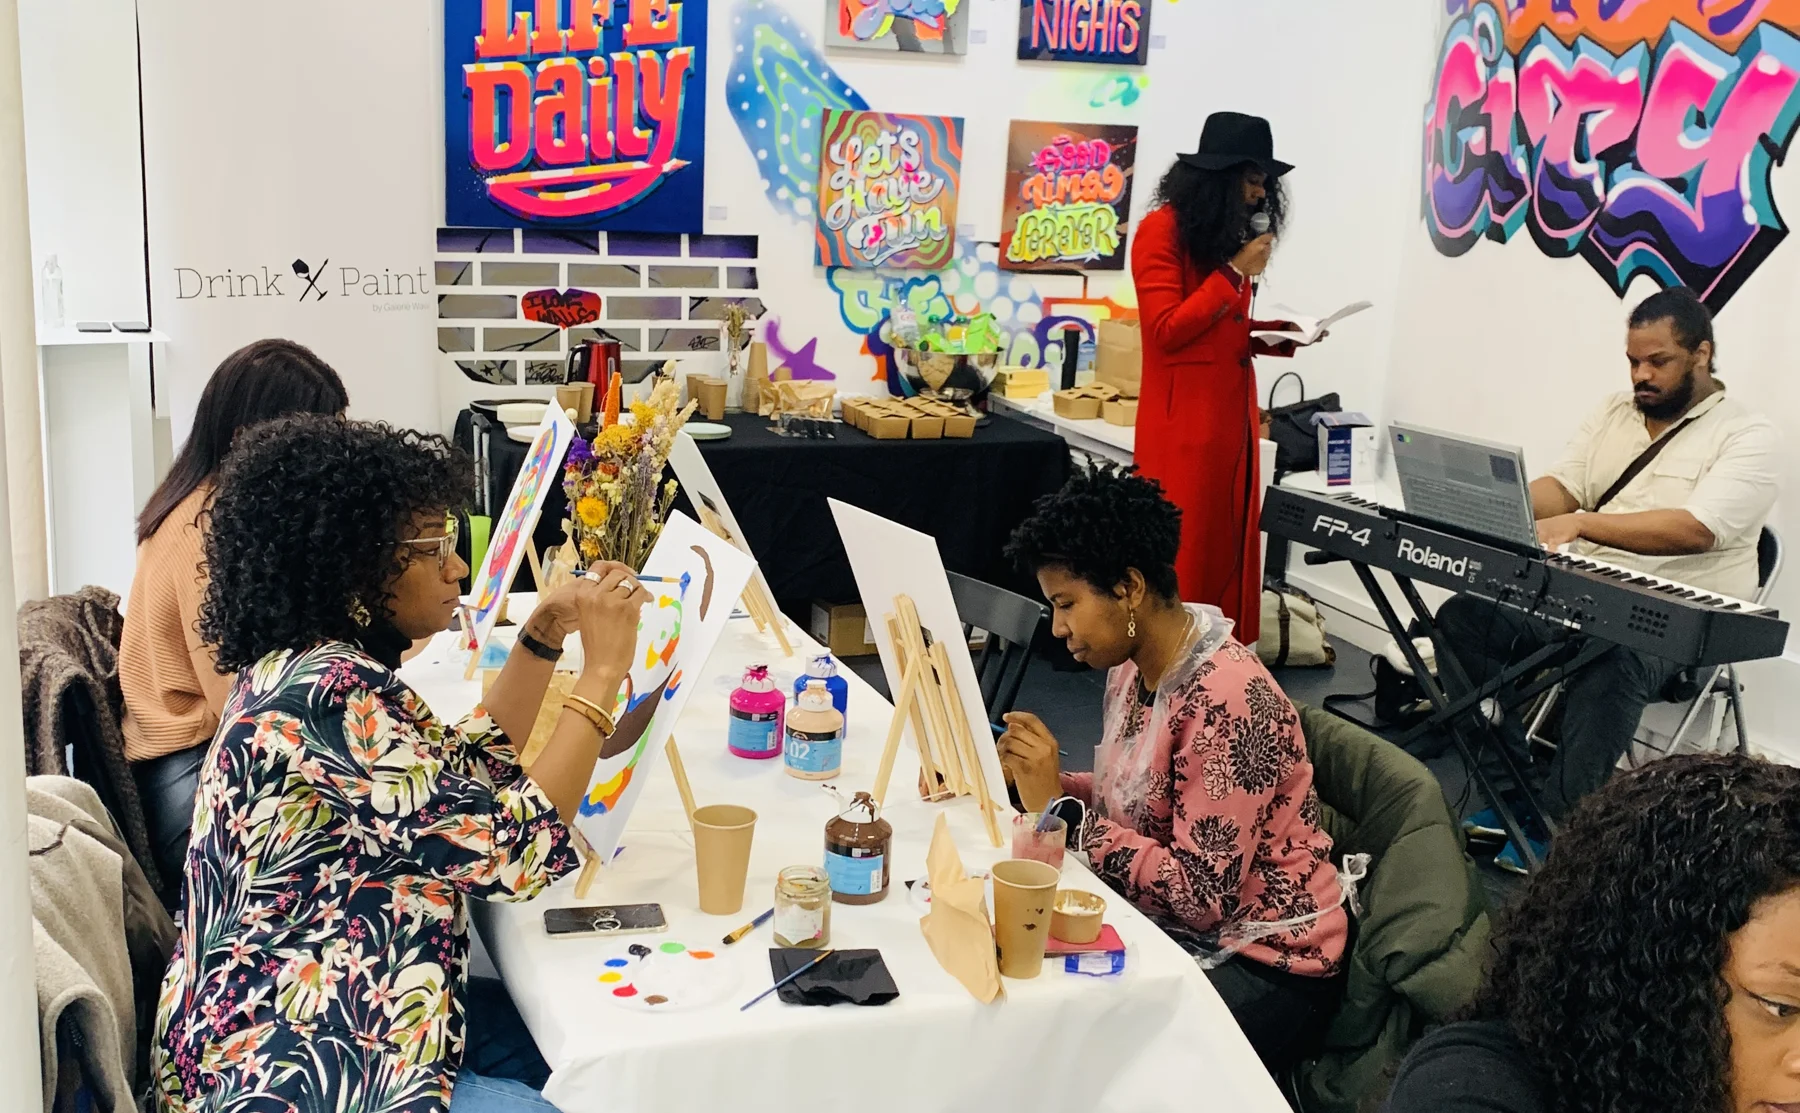 Brunch & Paint with Live Music in an Art Gallery (10 - 12 pm) - 1458145